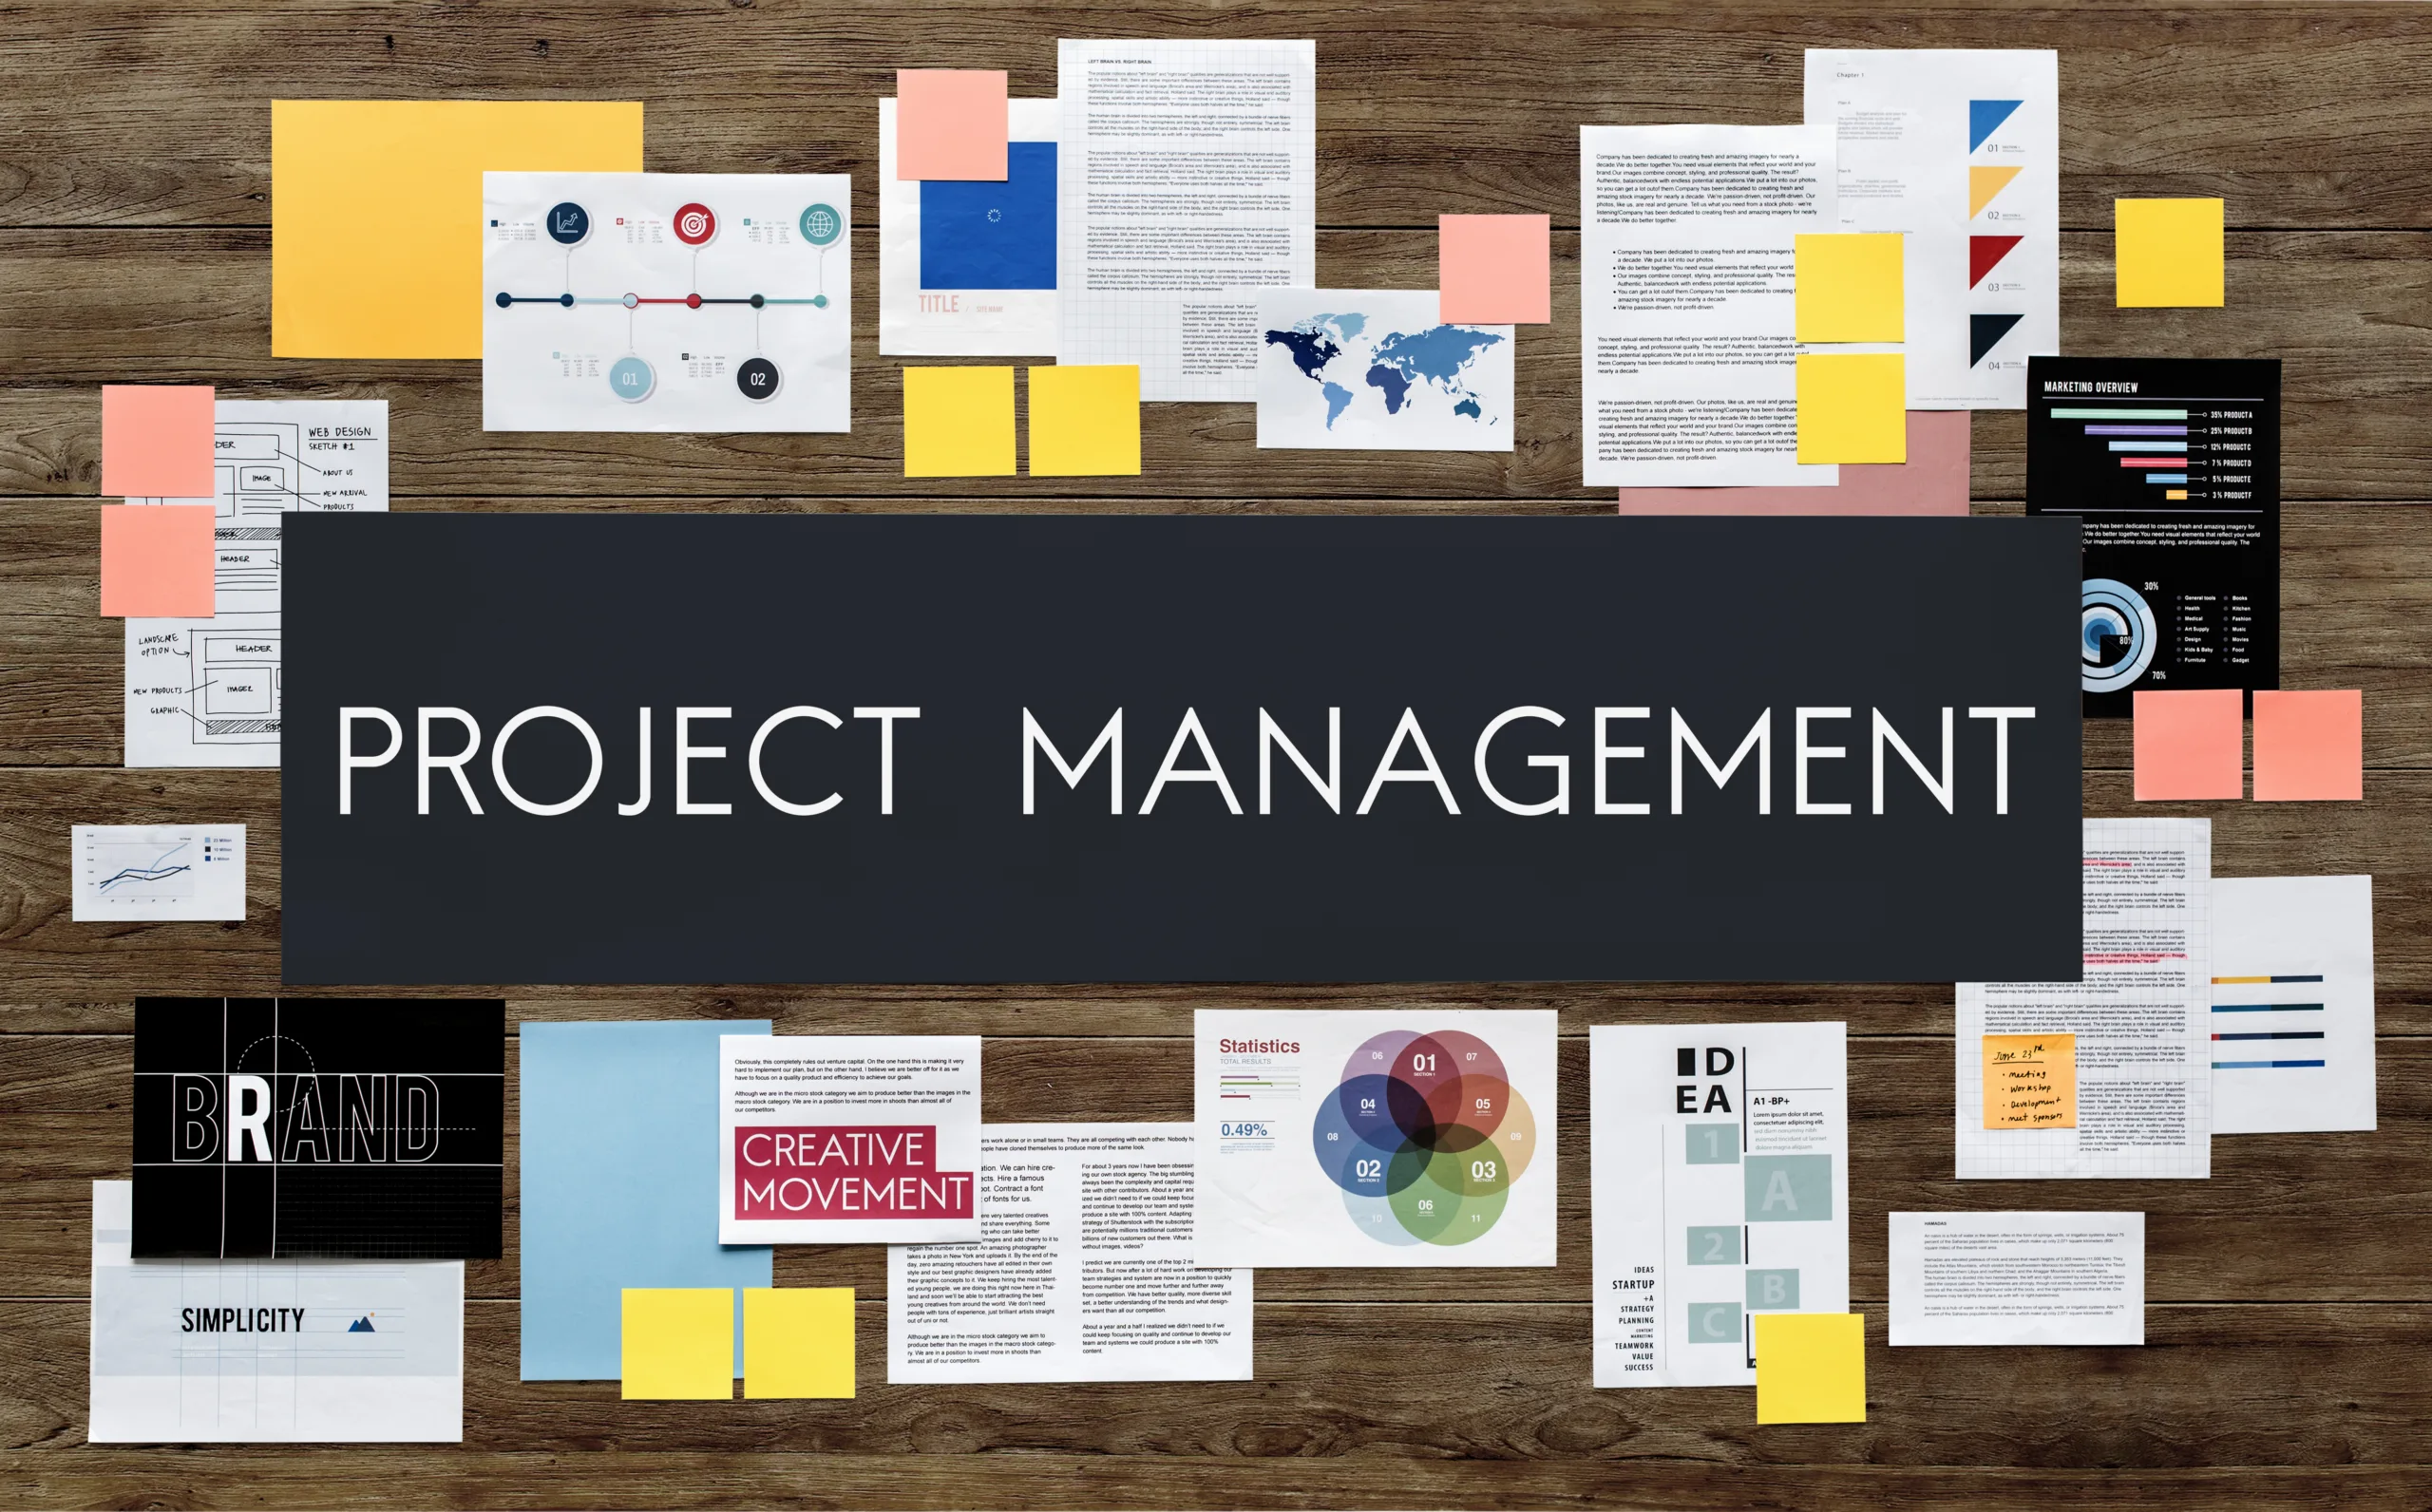 A board with papers and notes and a written text of Project Management.